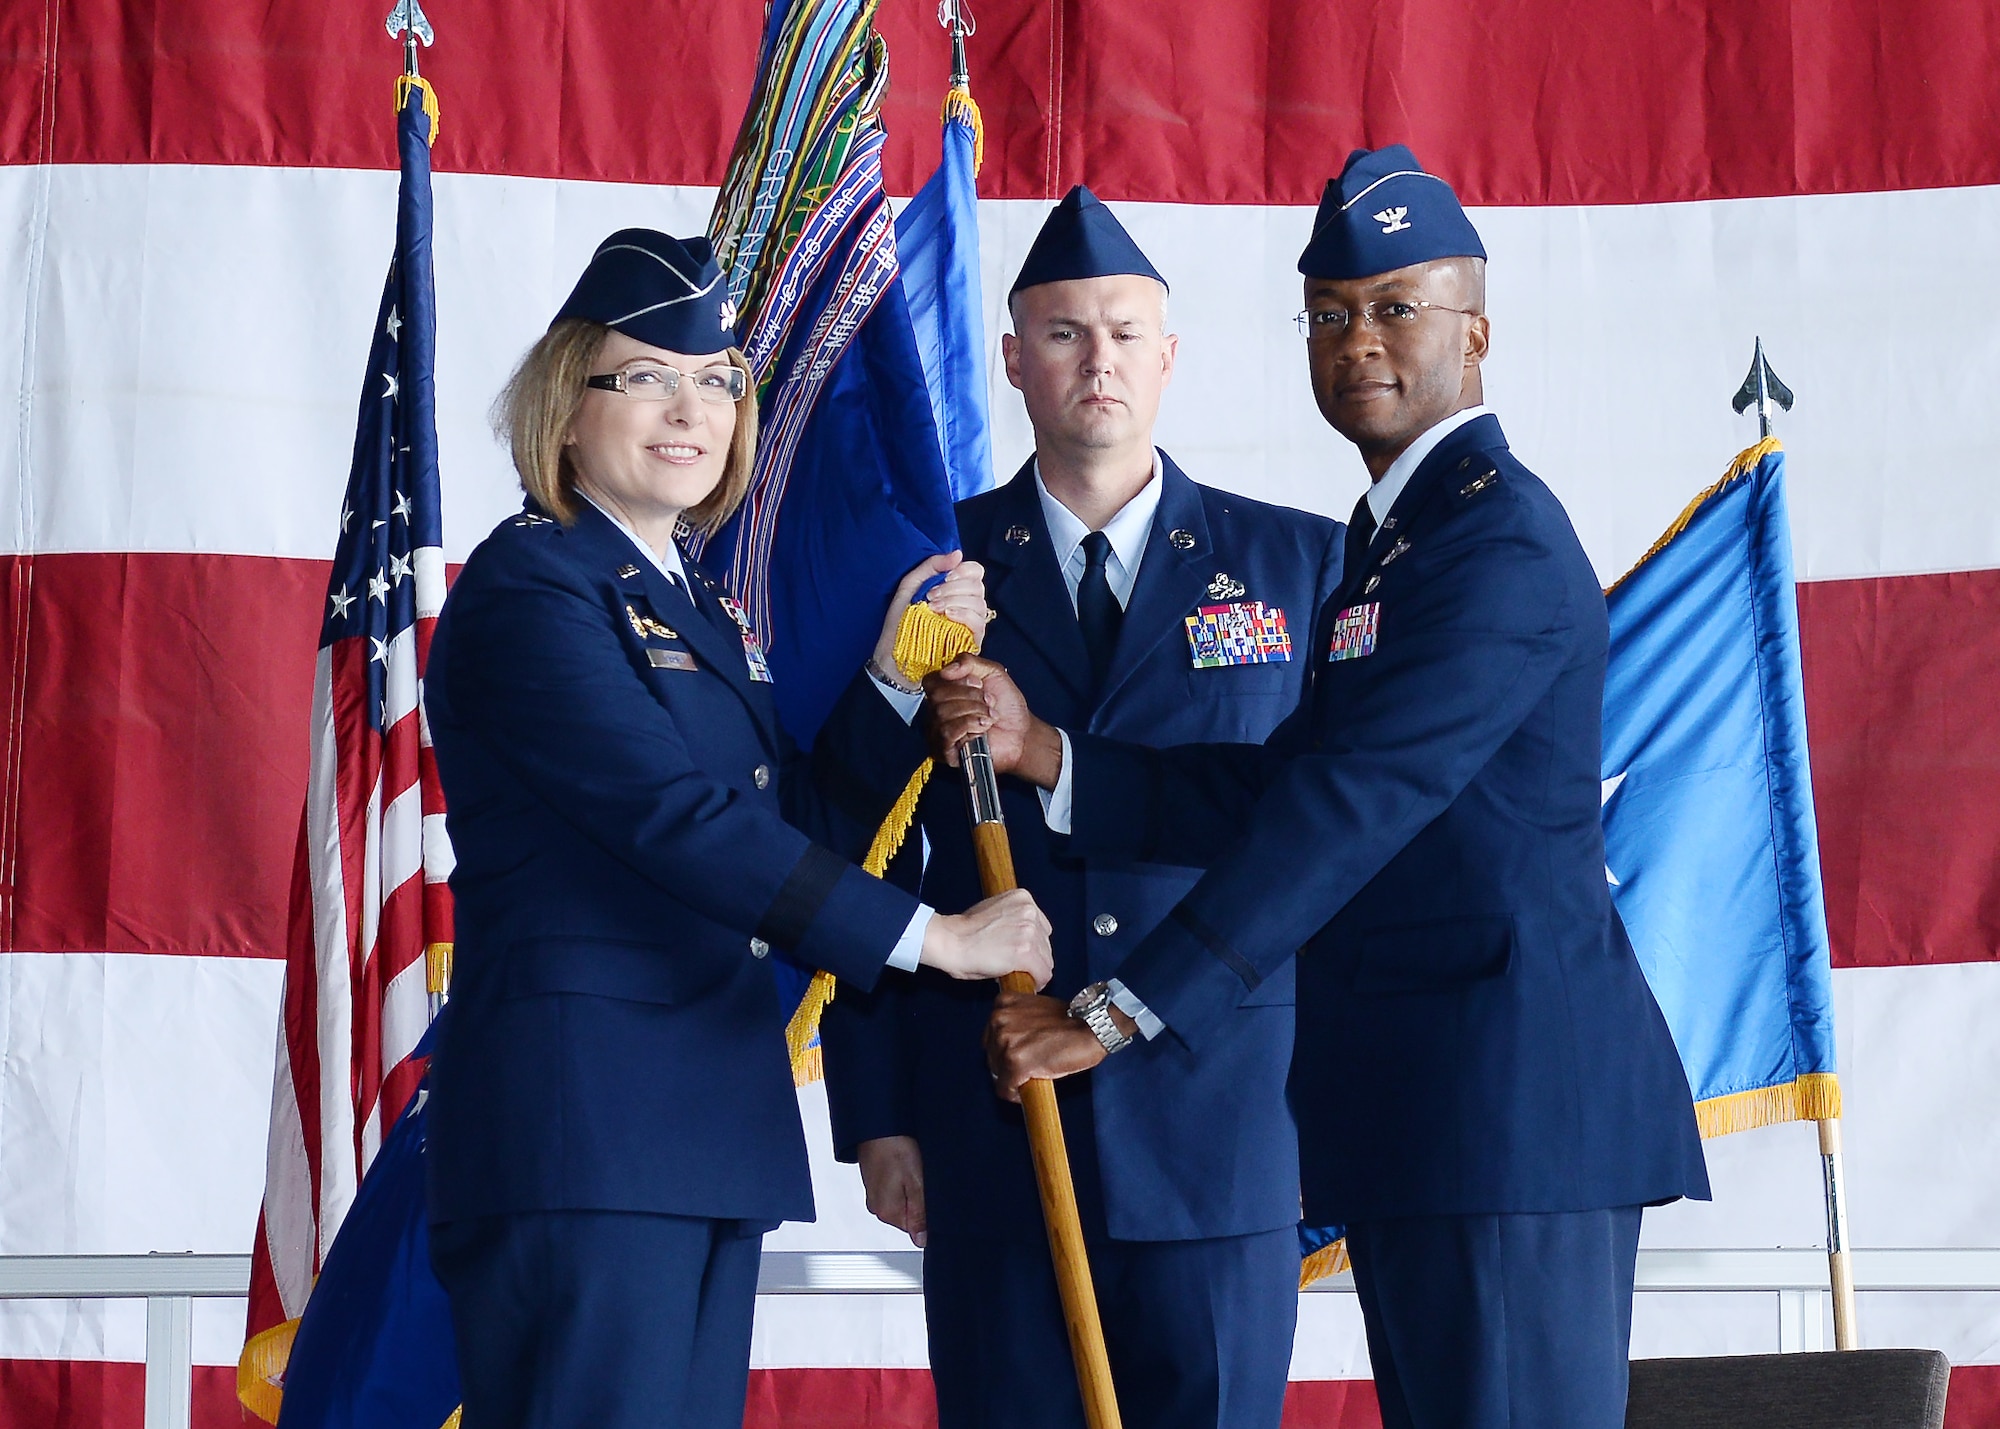 U.S. Air Force Maj. Gen. May O'Brien, 25th Air Force commander, passes the 55th Wing guidon to Col. Gavin Marks,  during the 55th Wing Change of Command ceremony June 14, 2019, inisde Dock 1 of the Bennie Davis Maintenance Facility at Offutt Air Force Base, Nebraska. Marks assumed command from Col. Michael H. Manion, who departs Offutt AFB for the Pentagon.